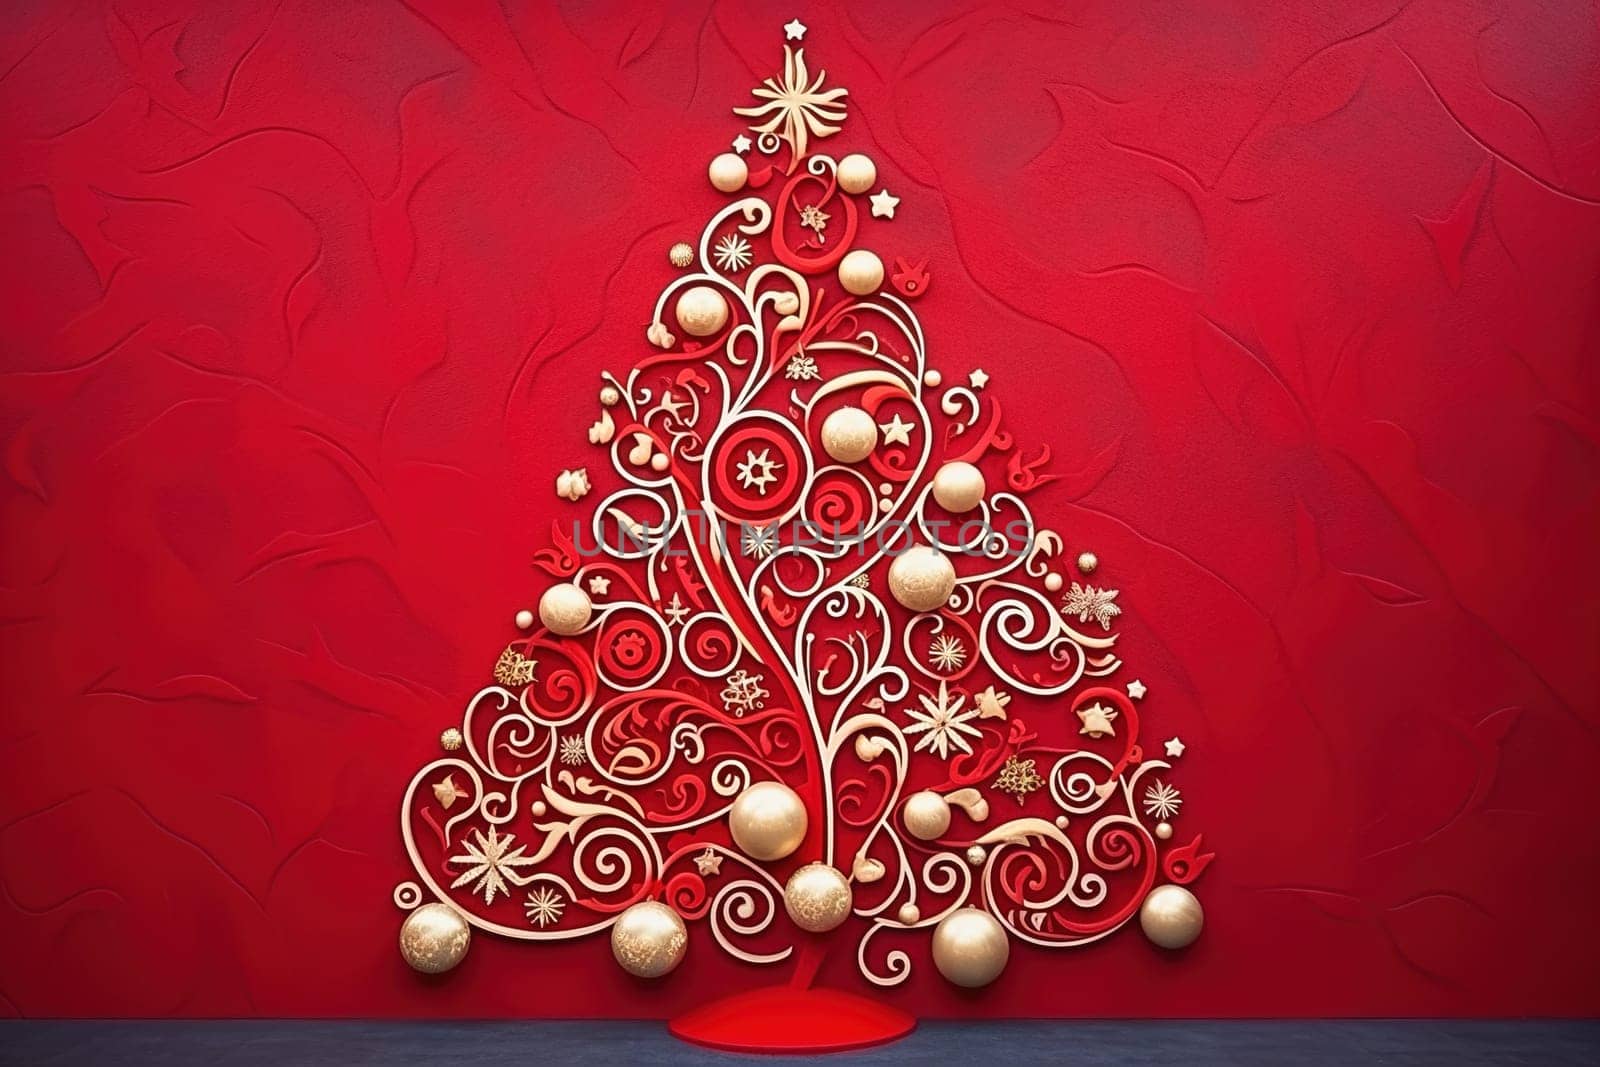 Illustration of 3d Christmas tree on red background. High quality illustration